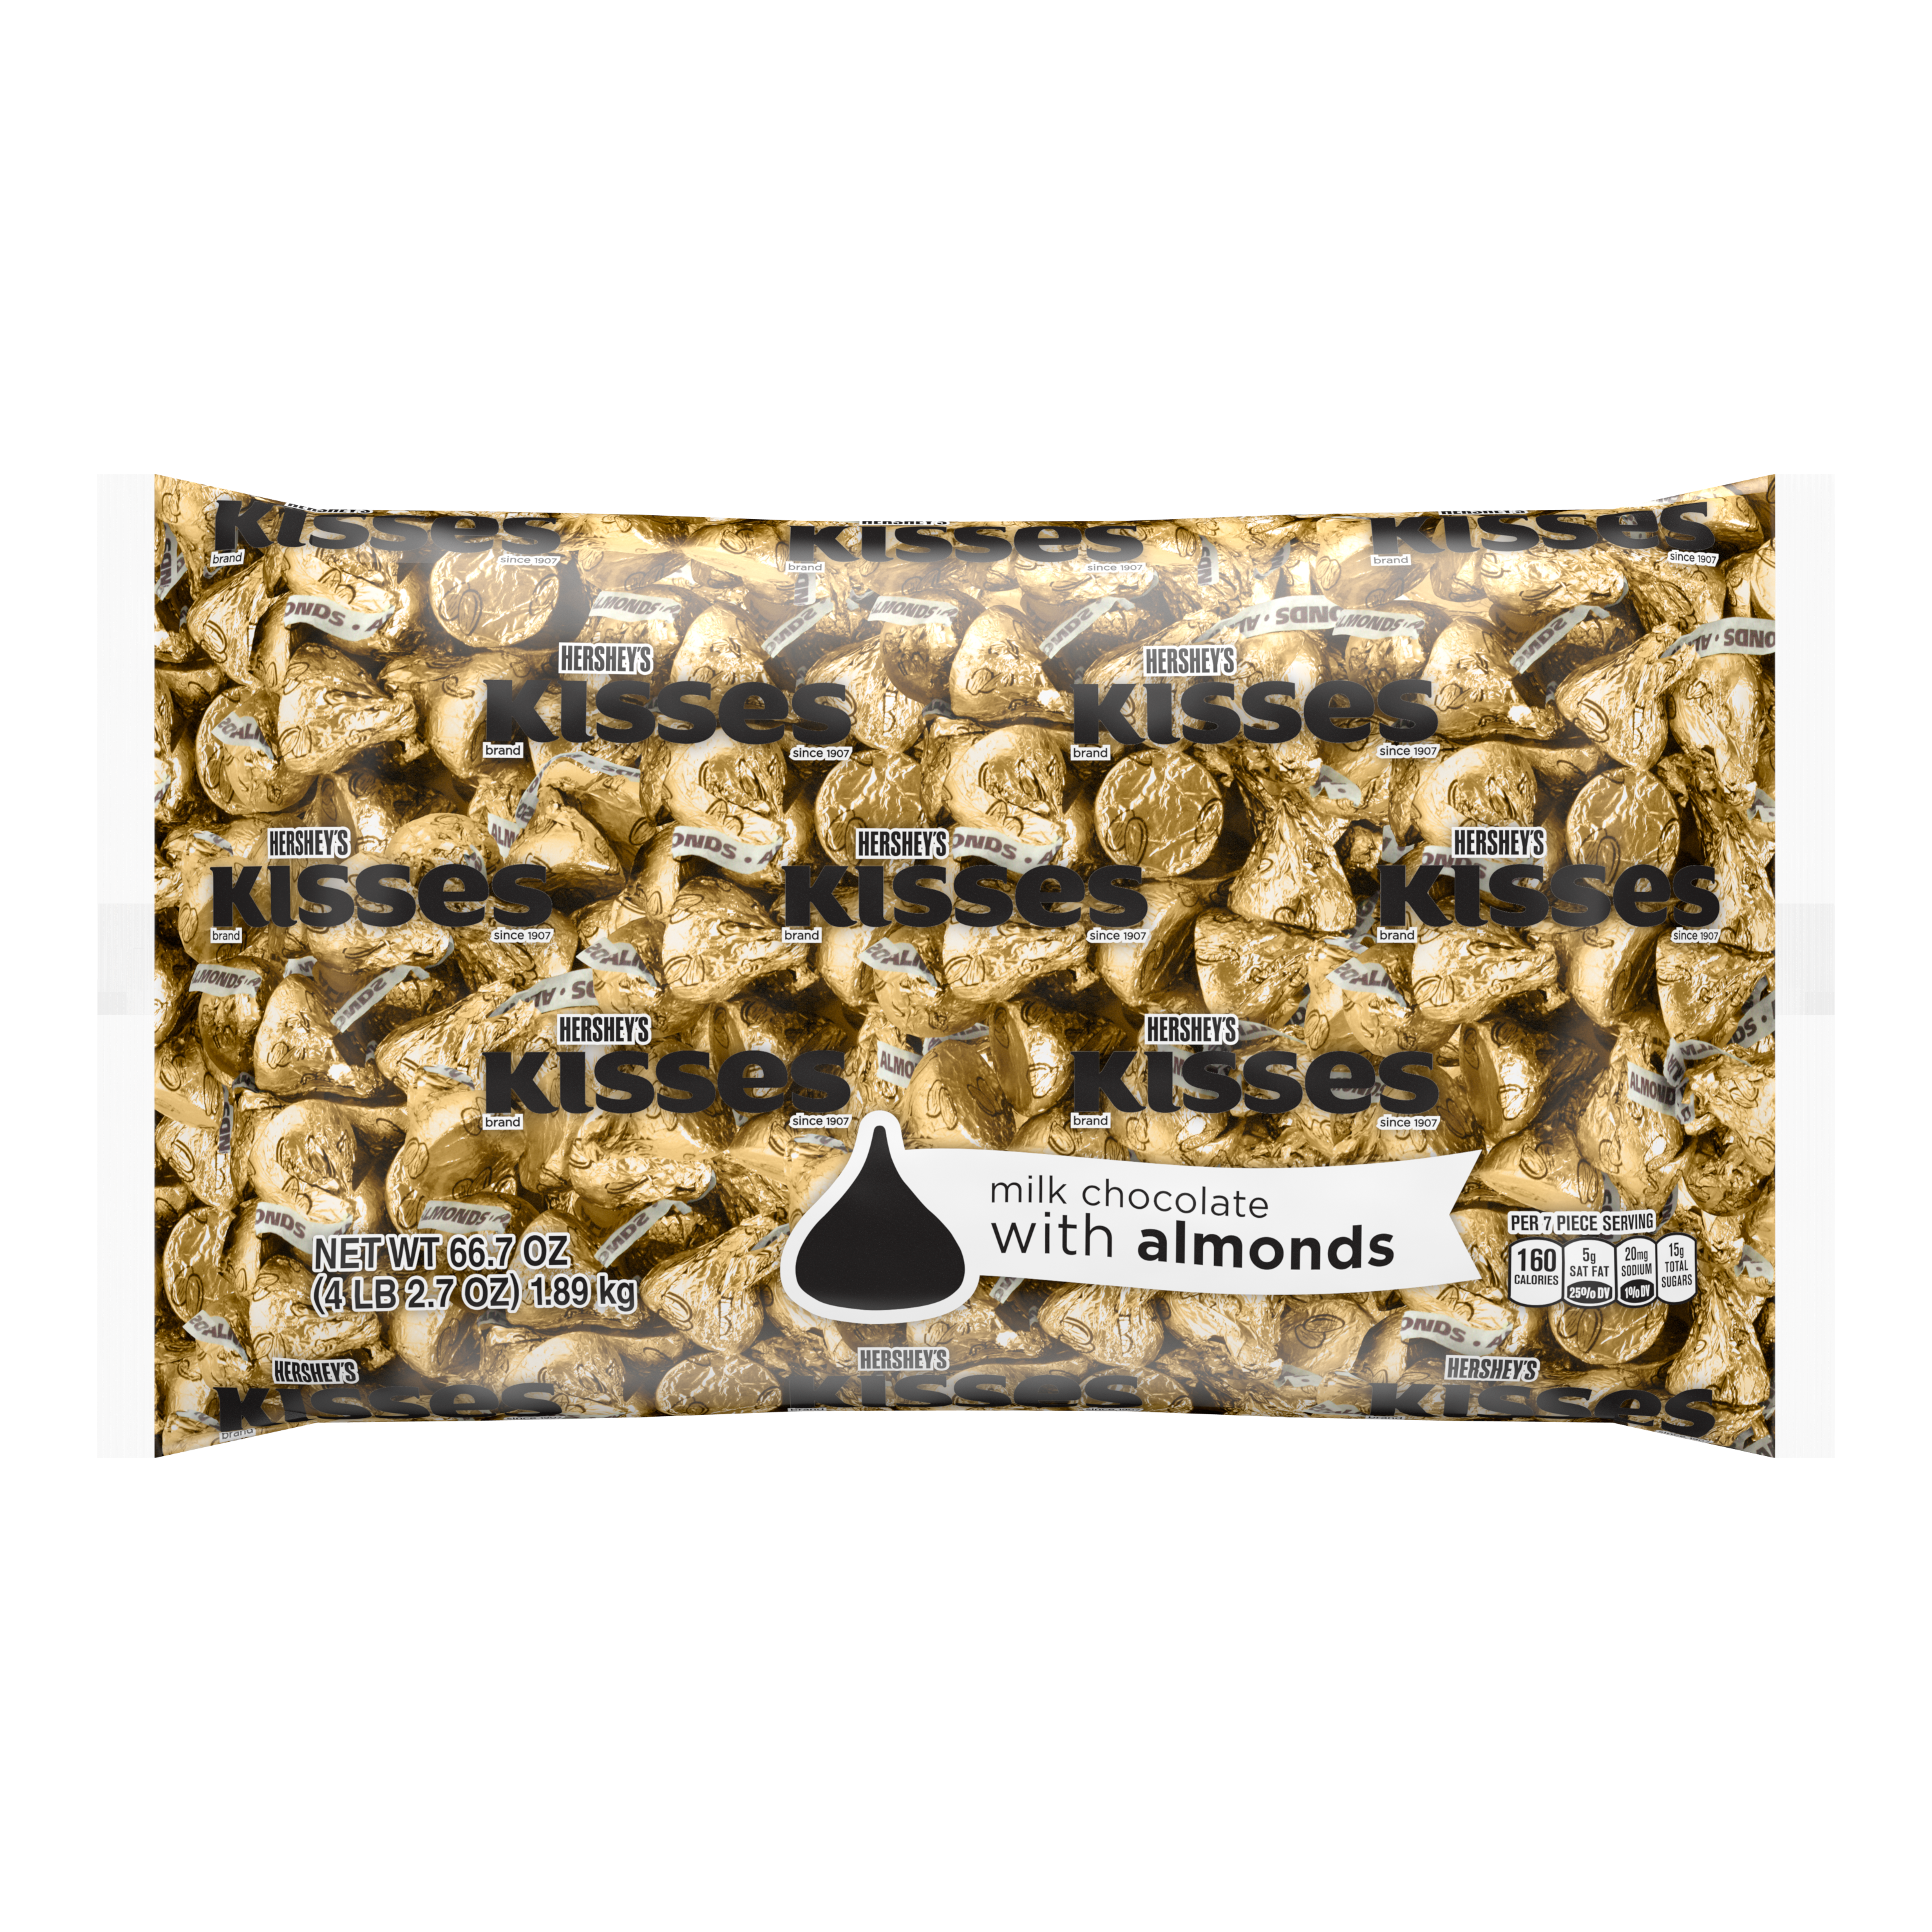 HERSHEY'S KISSES Gold Foil Milk Chocolate with Almonds Candy, 66.7 oz bag - Front of Package